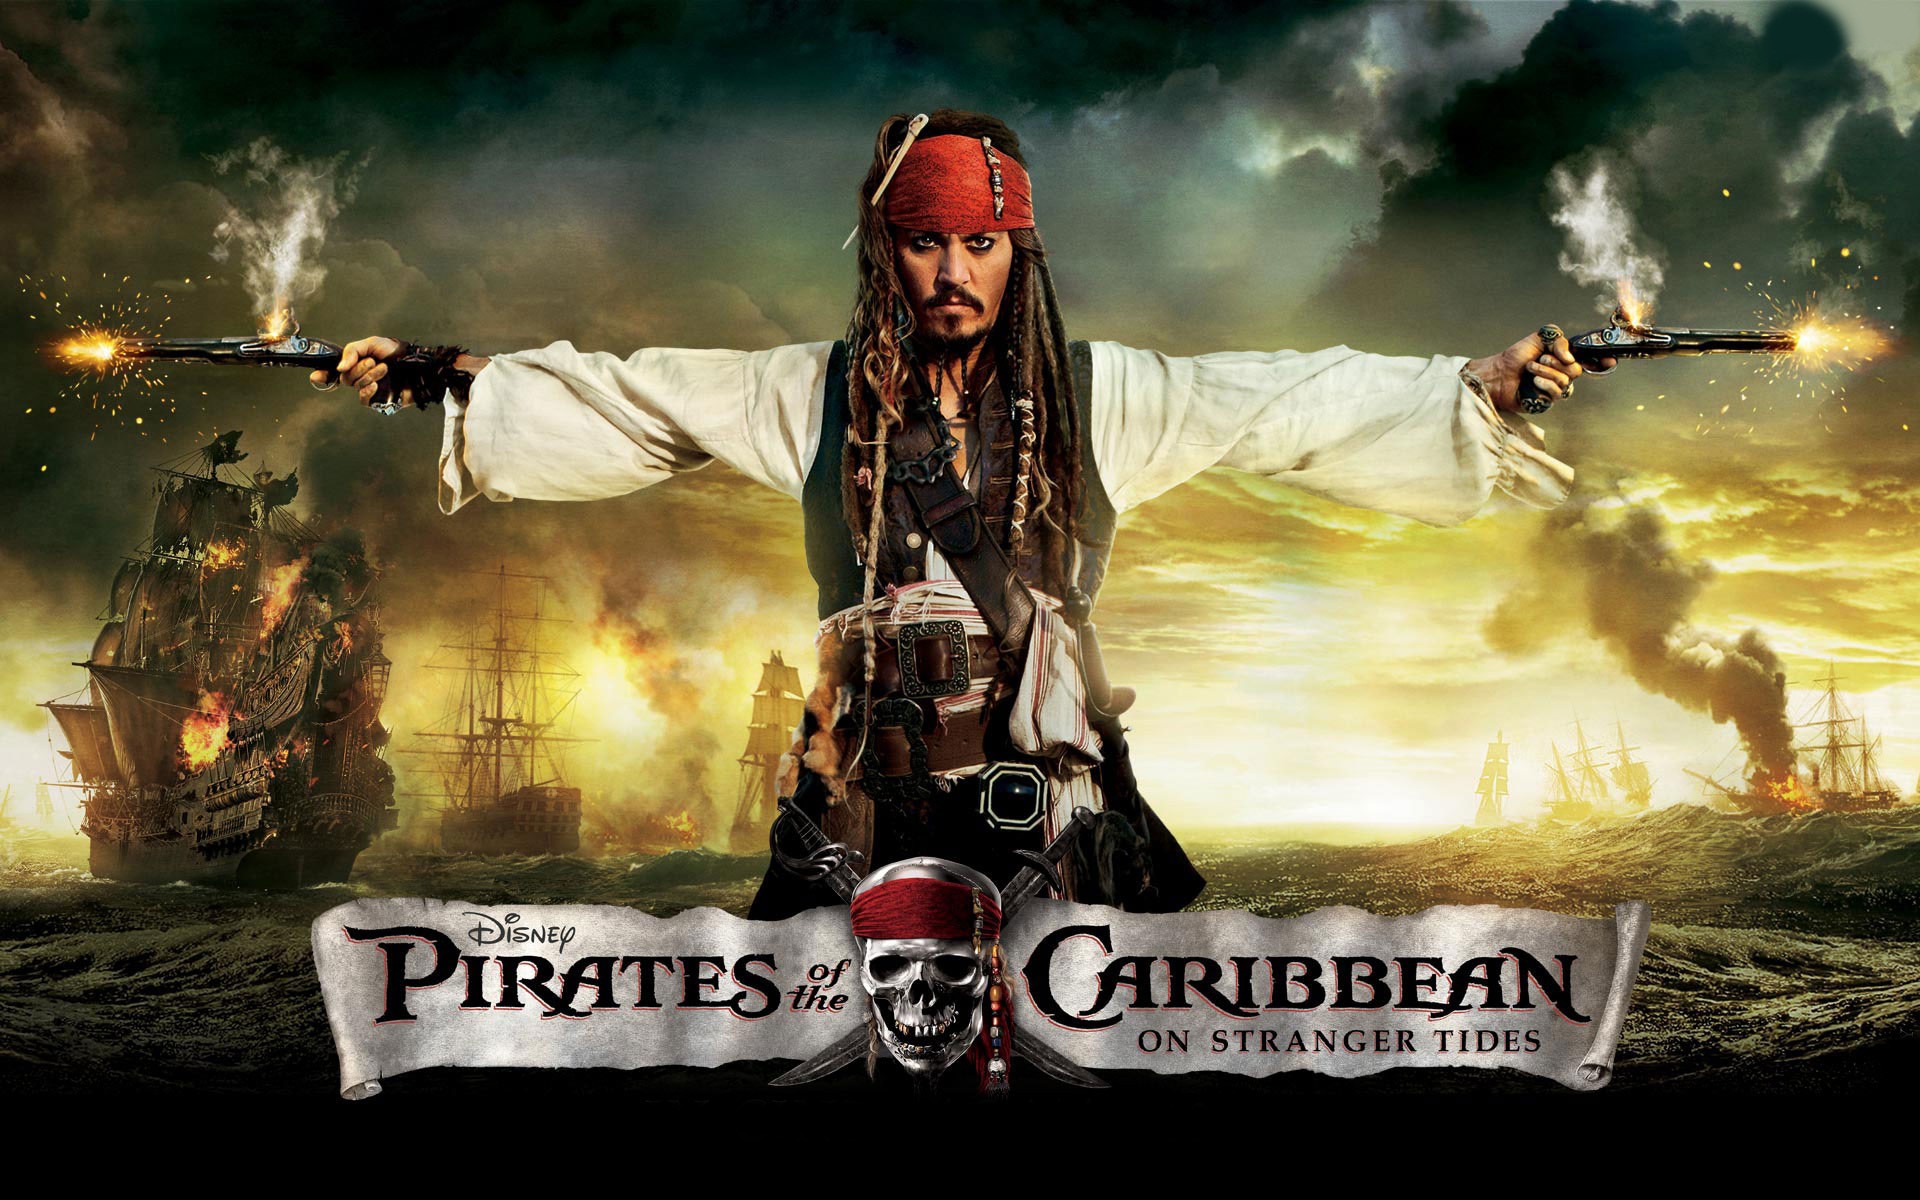 pirates of the caribbean 2 123movies